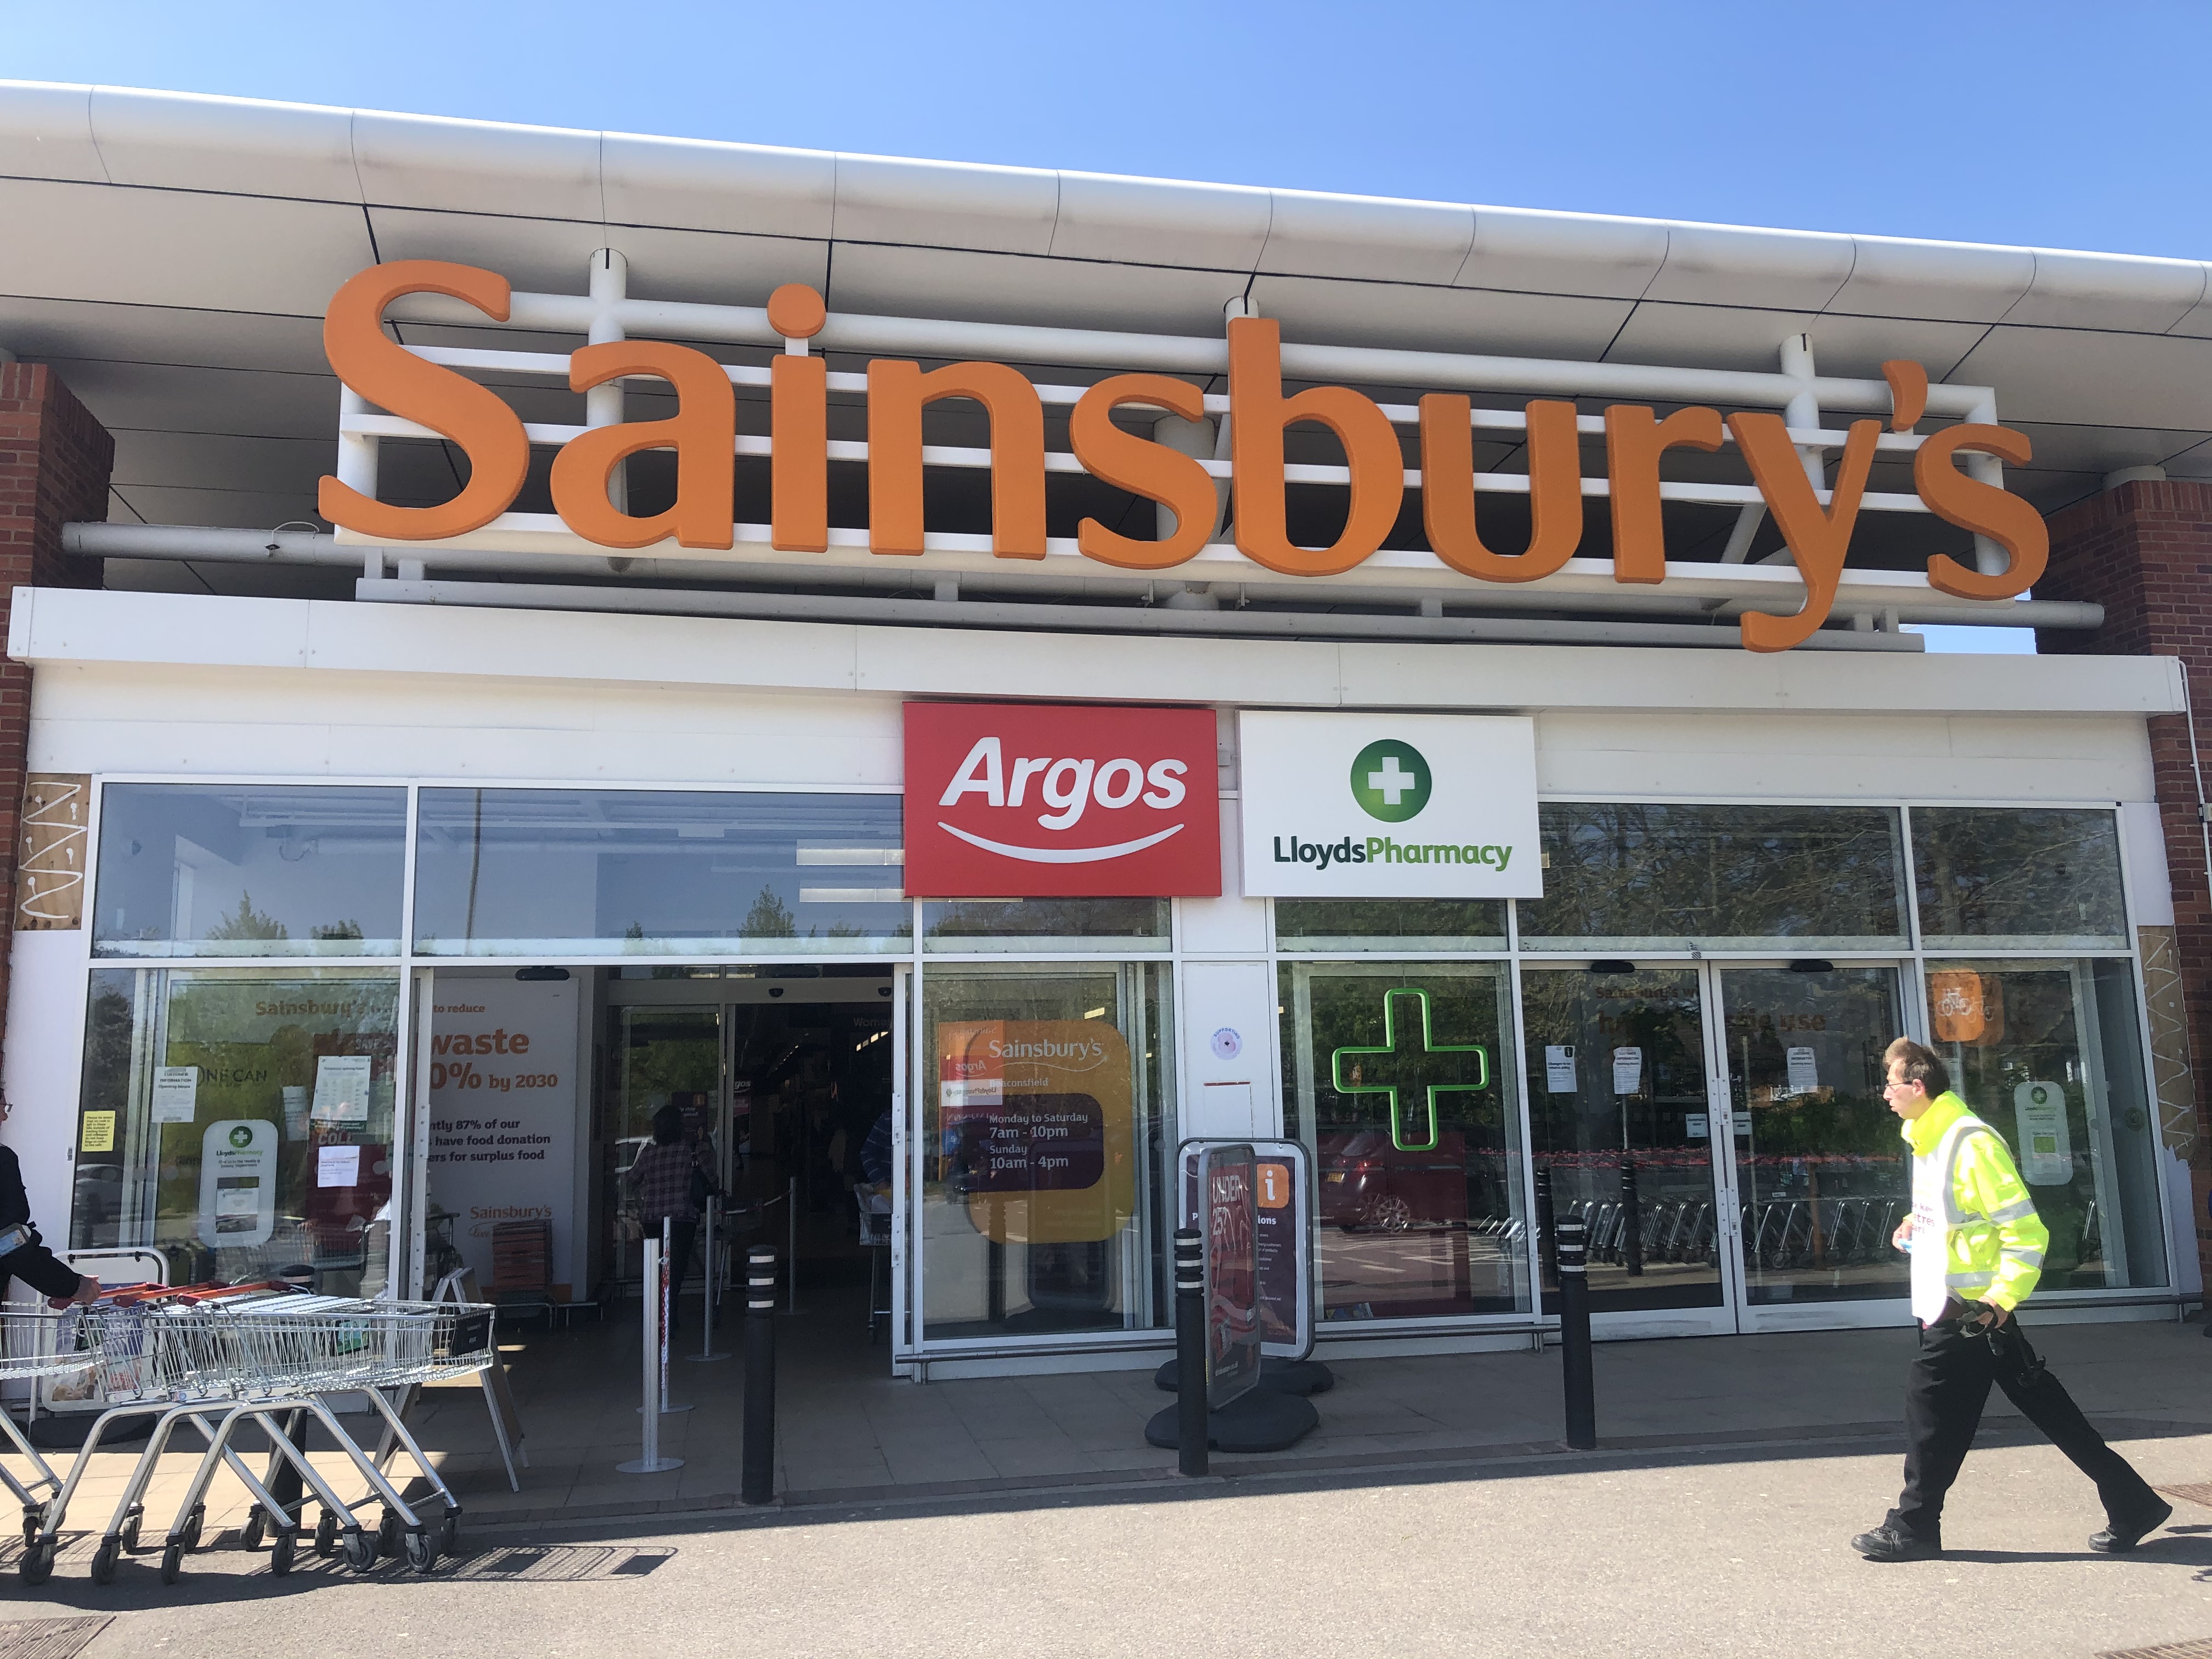 Above: Sainsbury’s stores has been one of the few multiples to have been able to offer consumers a good selection of greeting cards during lockdown.  